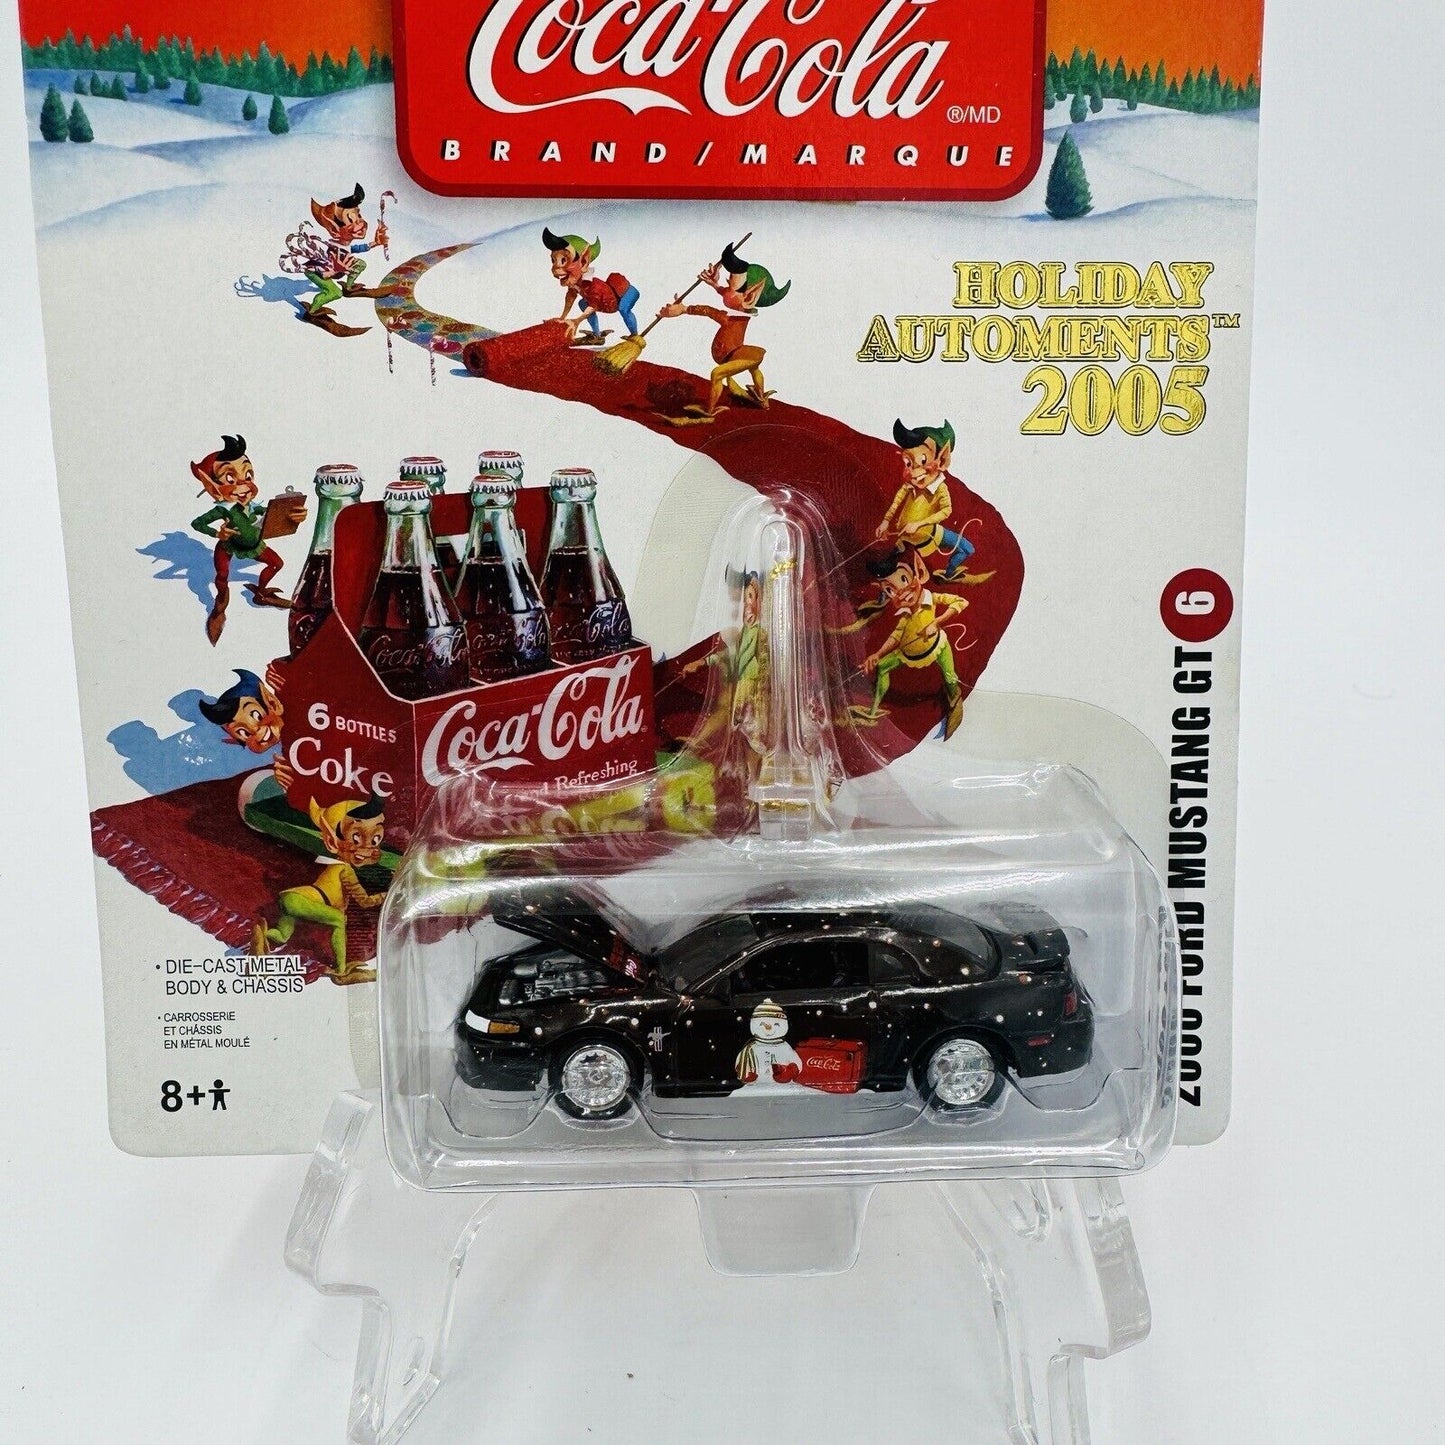 2005 Johnny Lightning Coca Cola Holiday Ornaments #6 2000 Ford Mustang GT